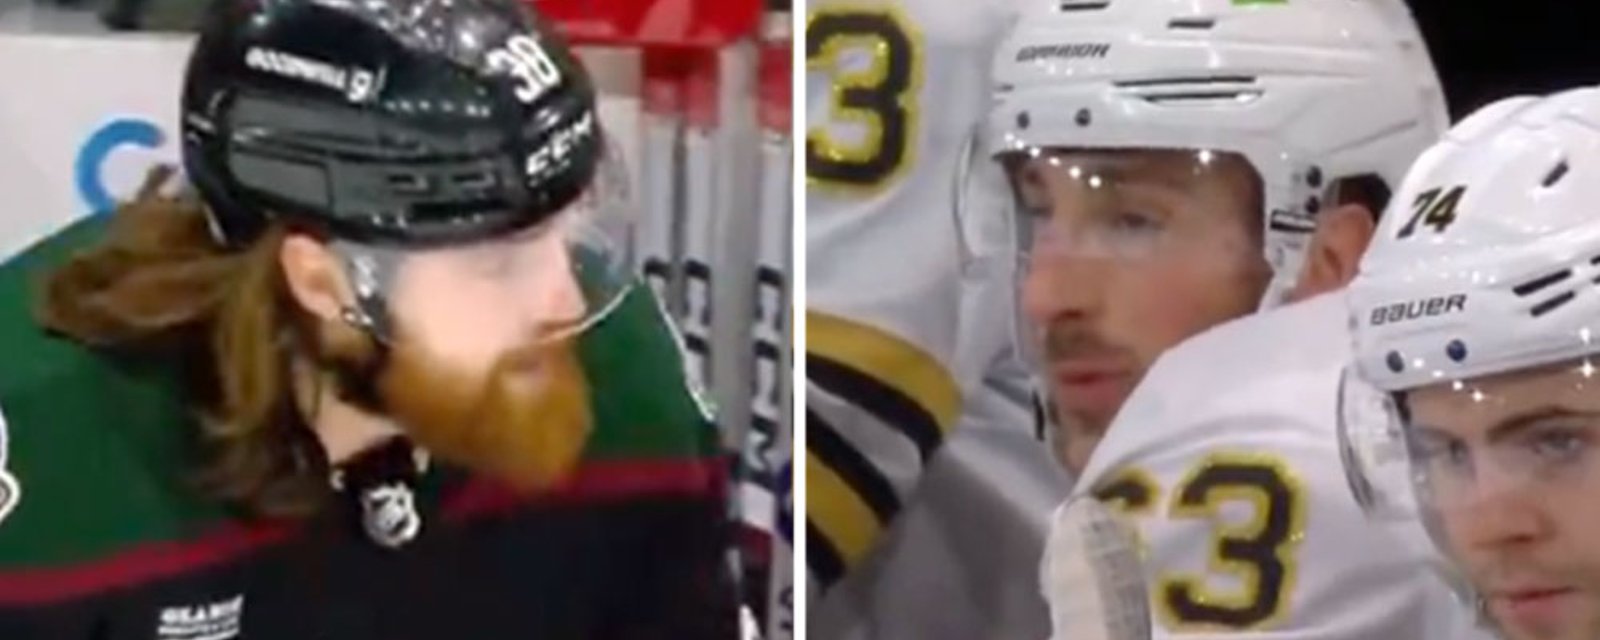 Liam O'Brien threatens Brad Marchand, but Marchand clearly doesn't care